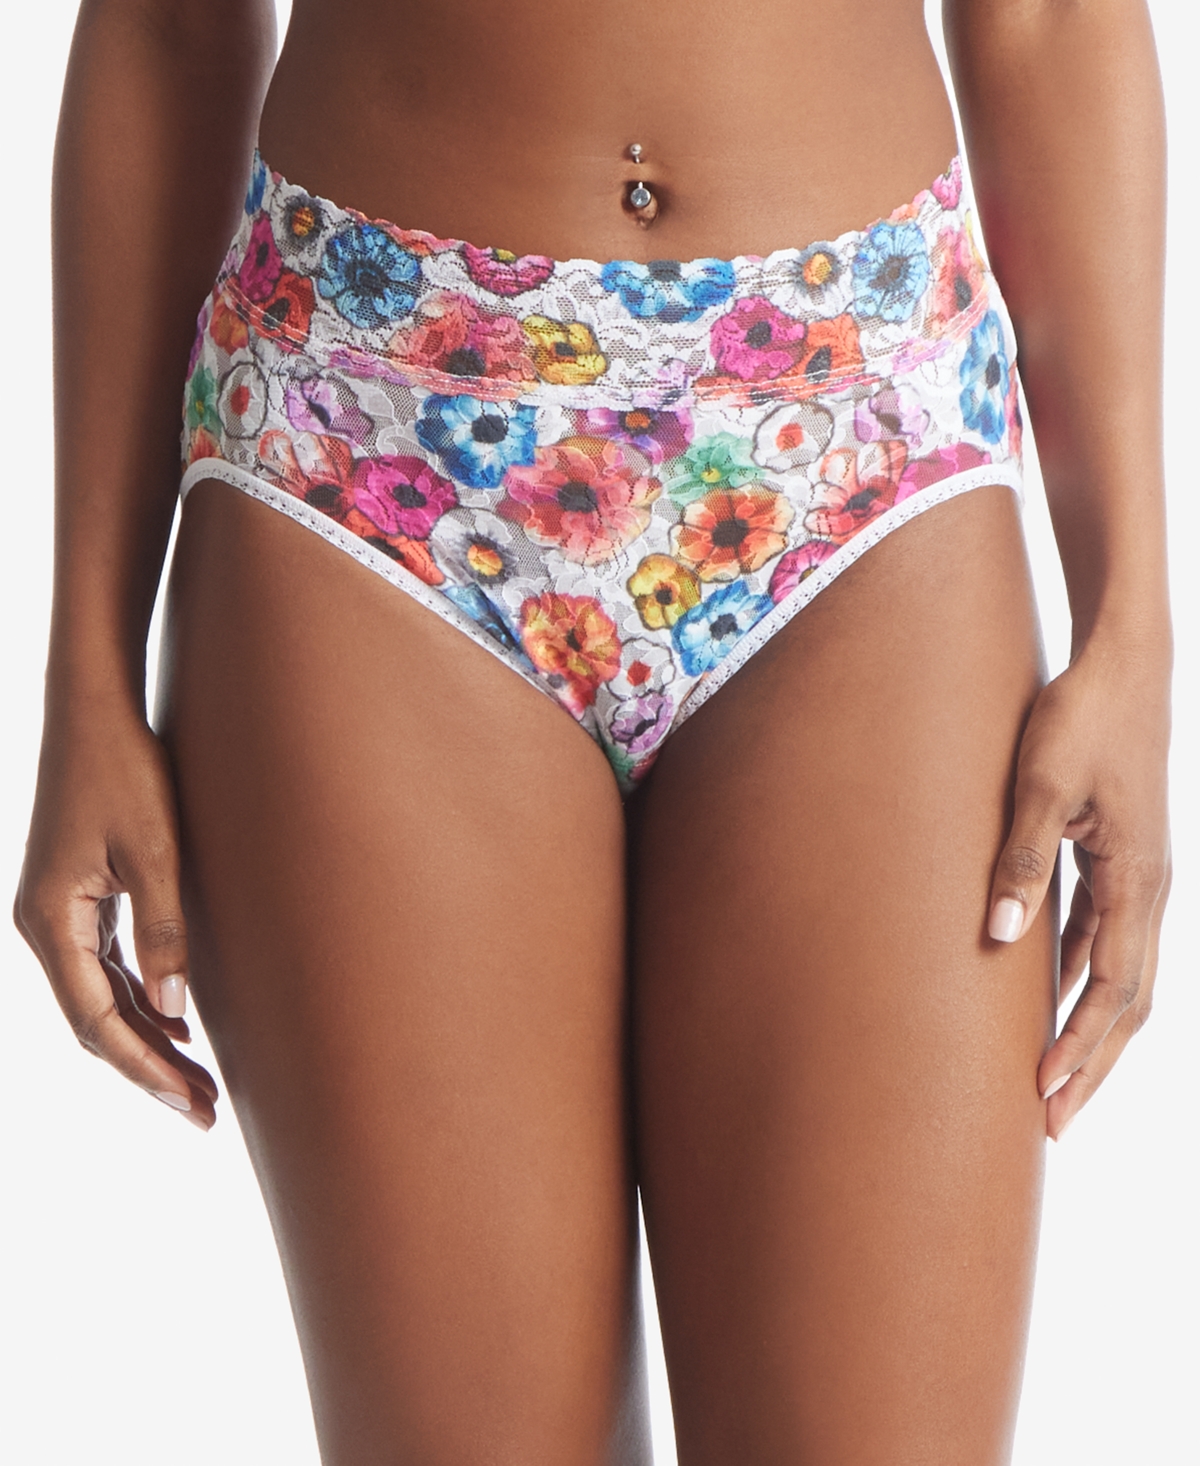 HANKY PANKY WOMEN'S PRINTED SIGNATURE LACE FRENCH BRIEF UNDERWEAR